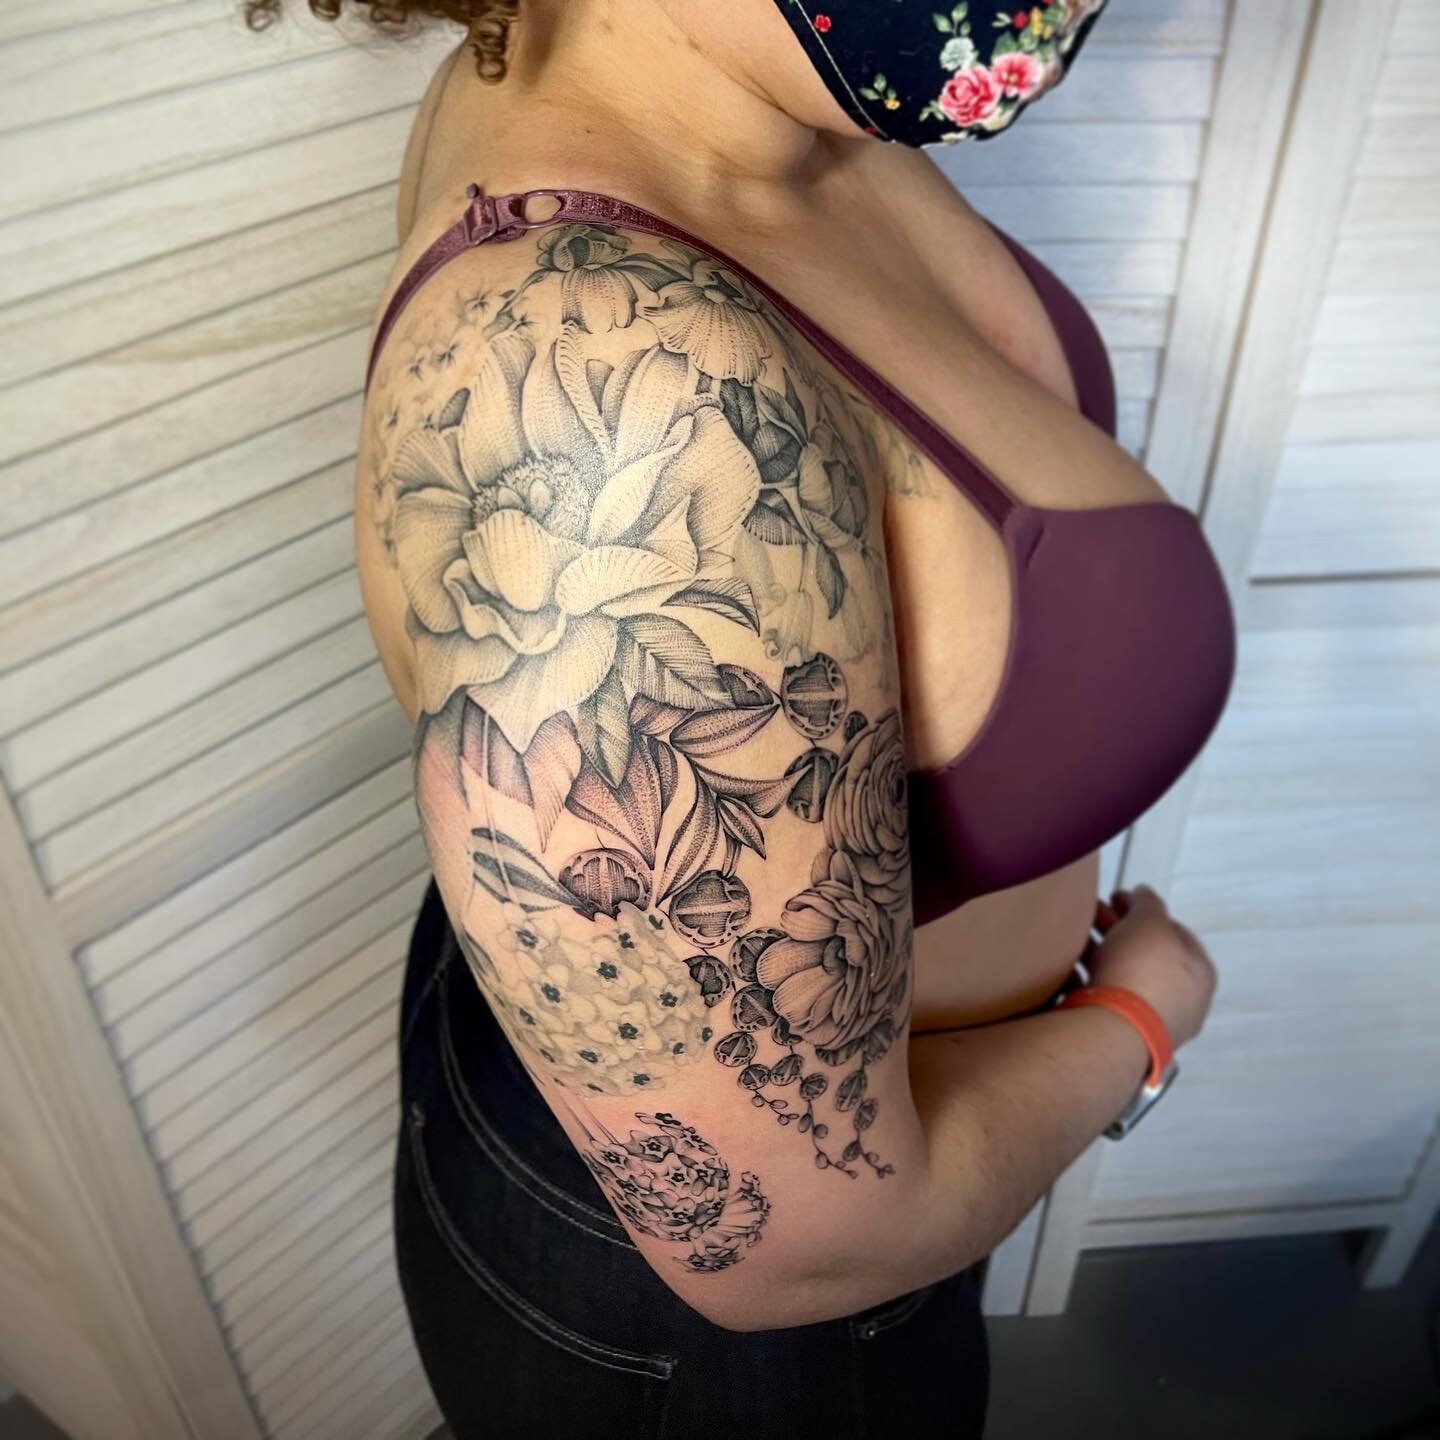 So many lovely flowers and hour plants in this piece: peonies, irises, camellias, hoya, wandering Jew, string of turtles, pansies, and blue bells. Partly ✨healed✨ and partly fresh. 
🌿🌸🌿
...
...
...
...
...
#dotworktattoo #ladytattooers #blackandgr